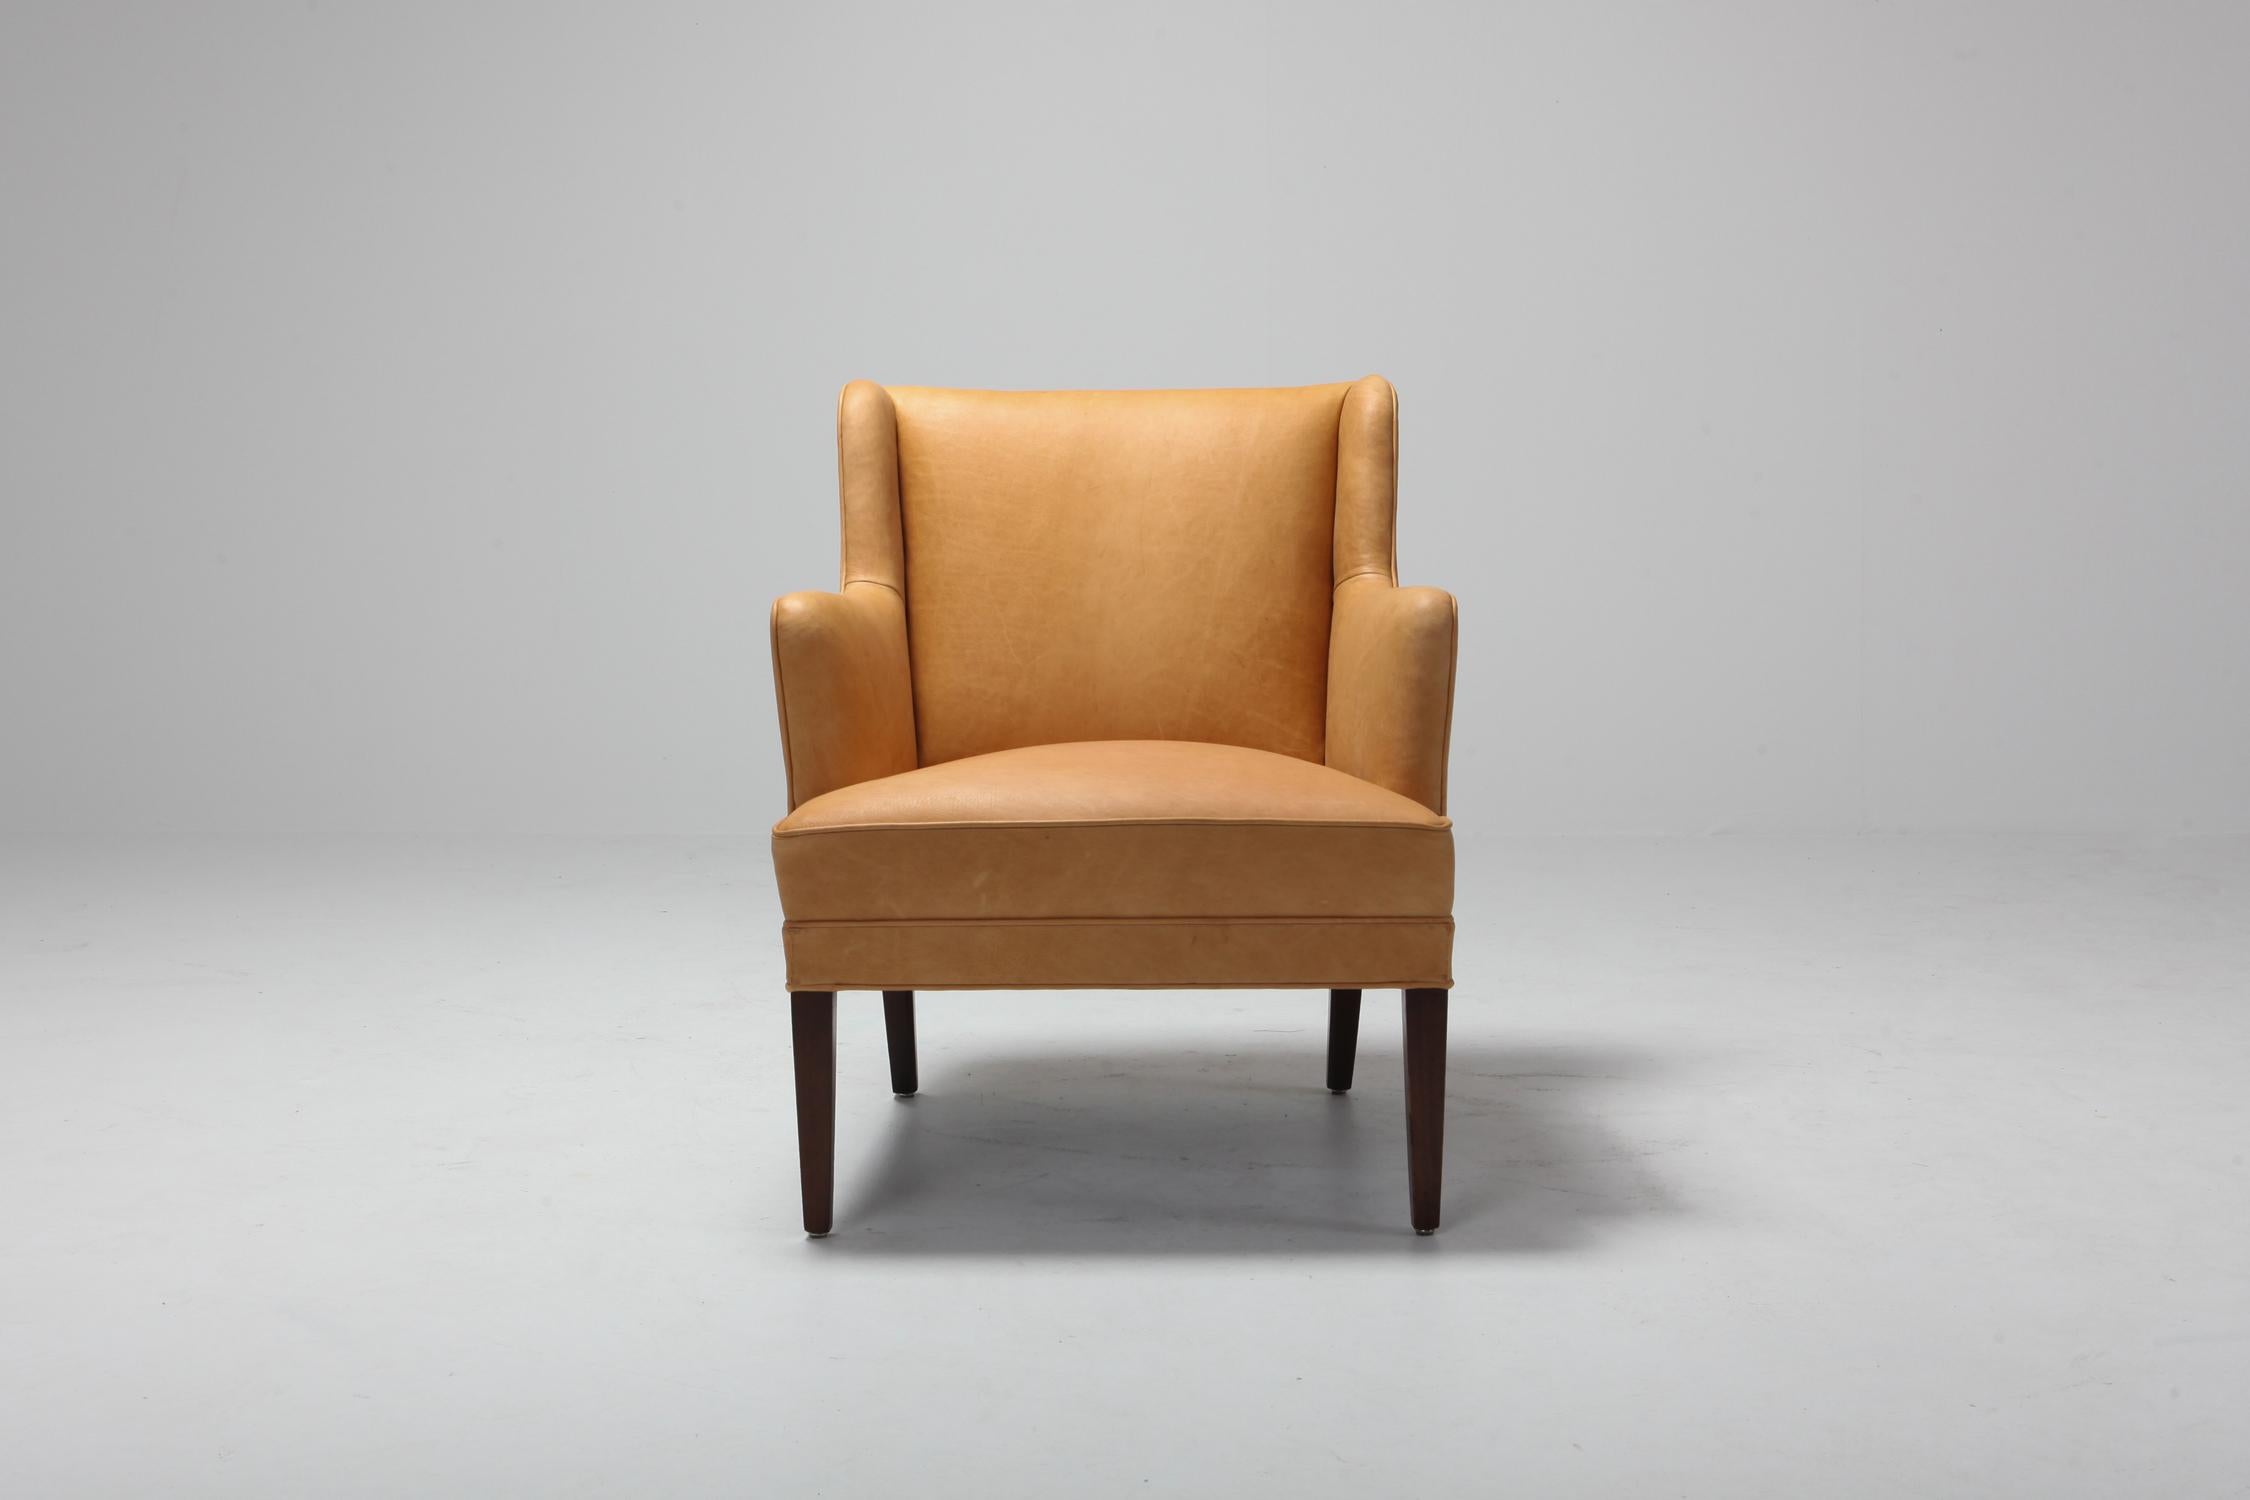 Mid-20th Century Scandinavian Modern Bergere Chairs in Camel Leather